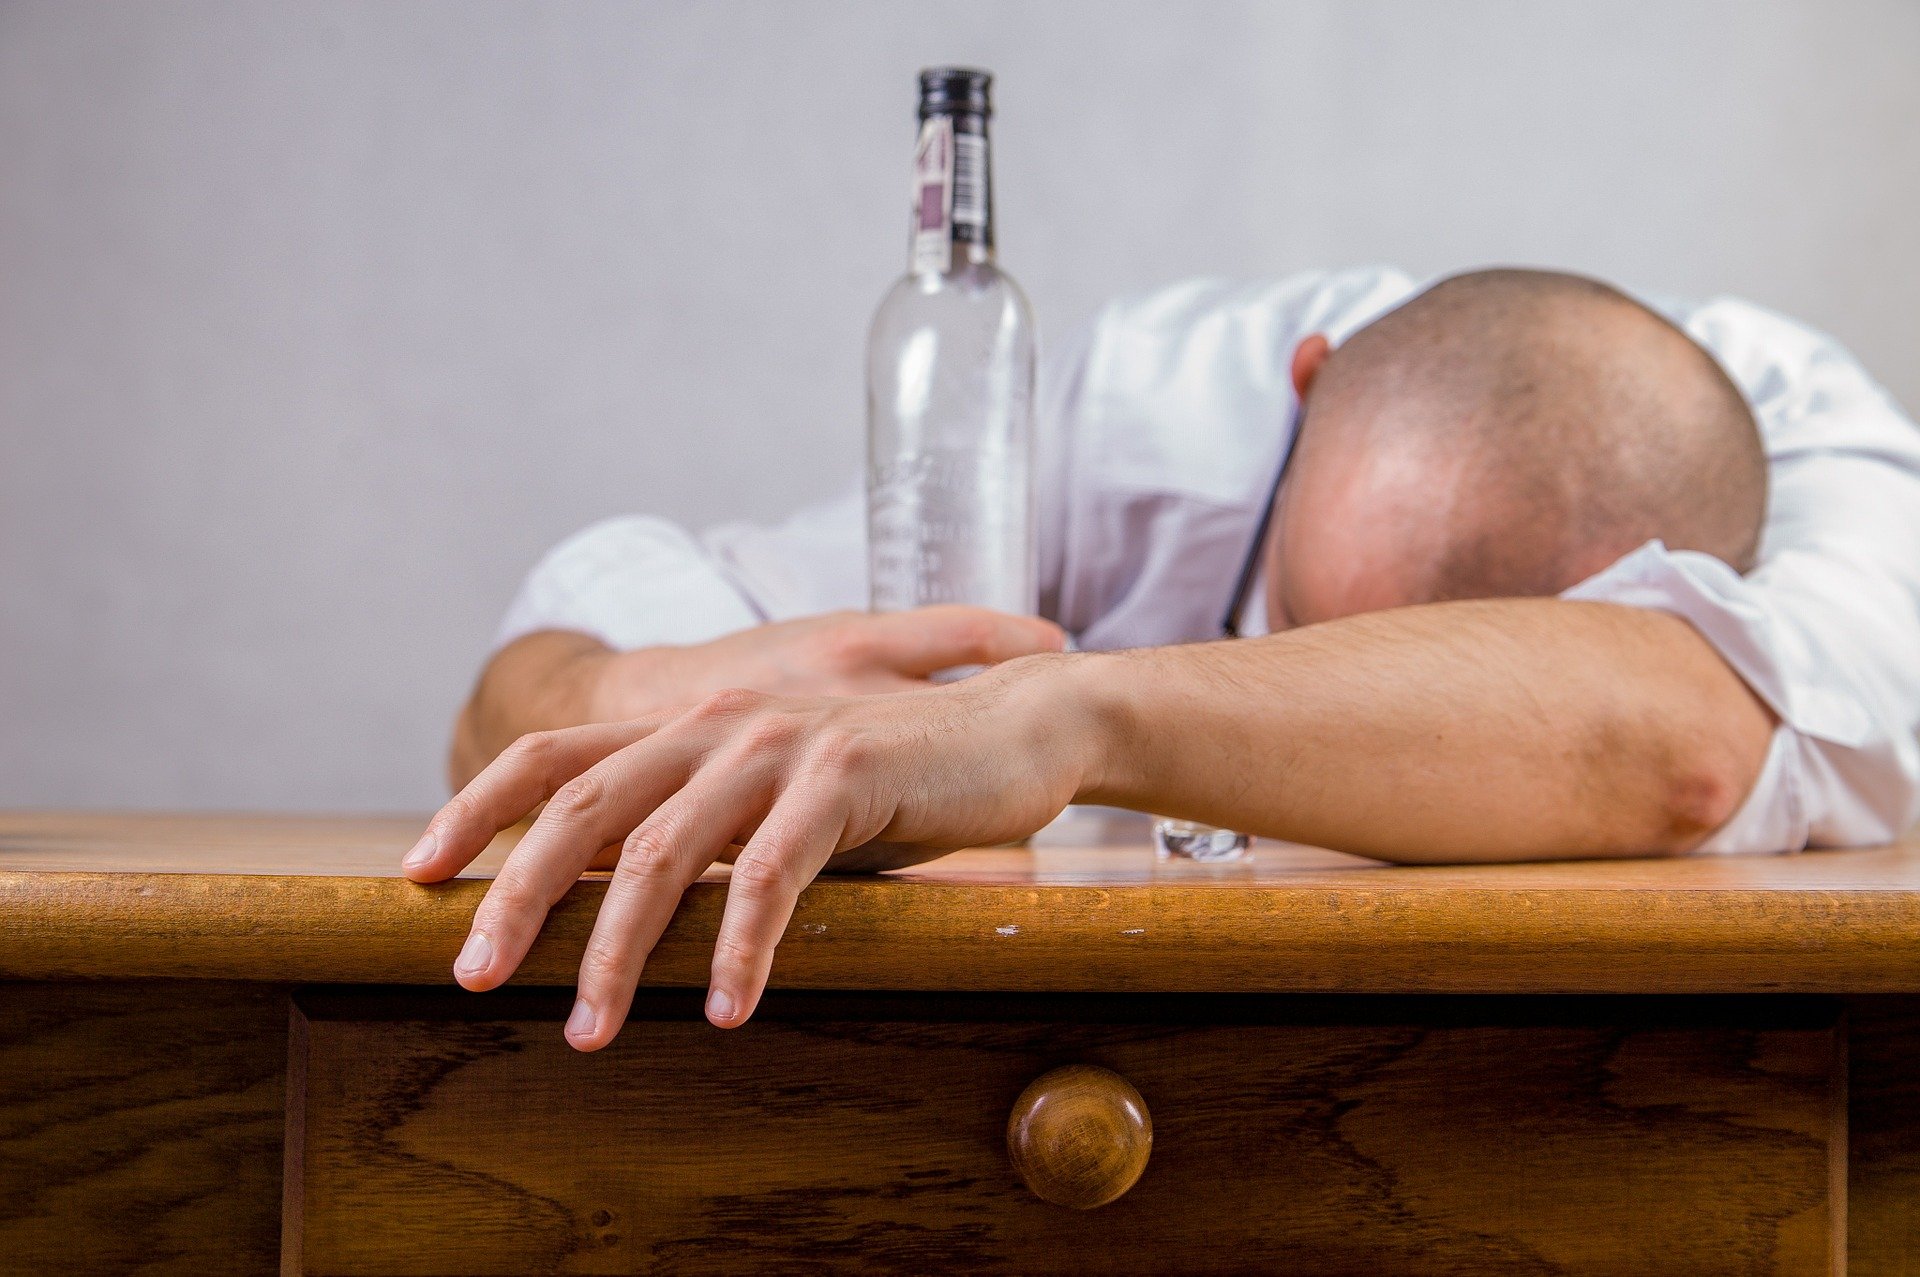 We Slapped On A Hangover Patch And Then Got Really, Really Drunk